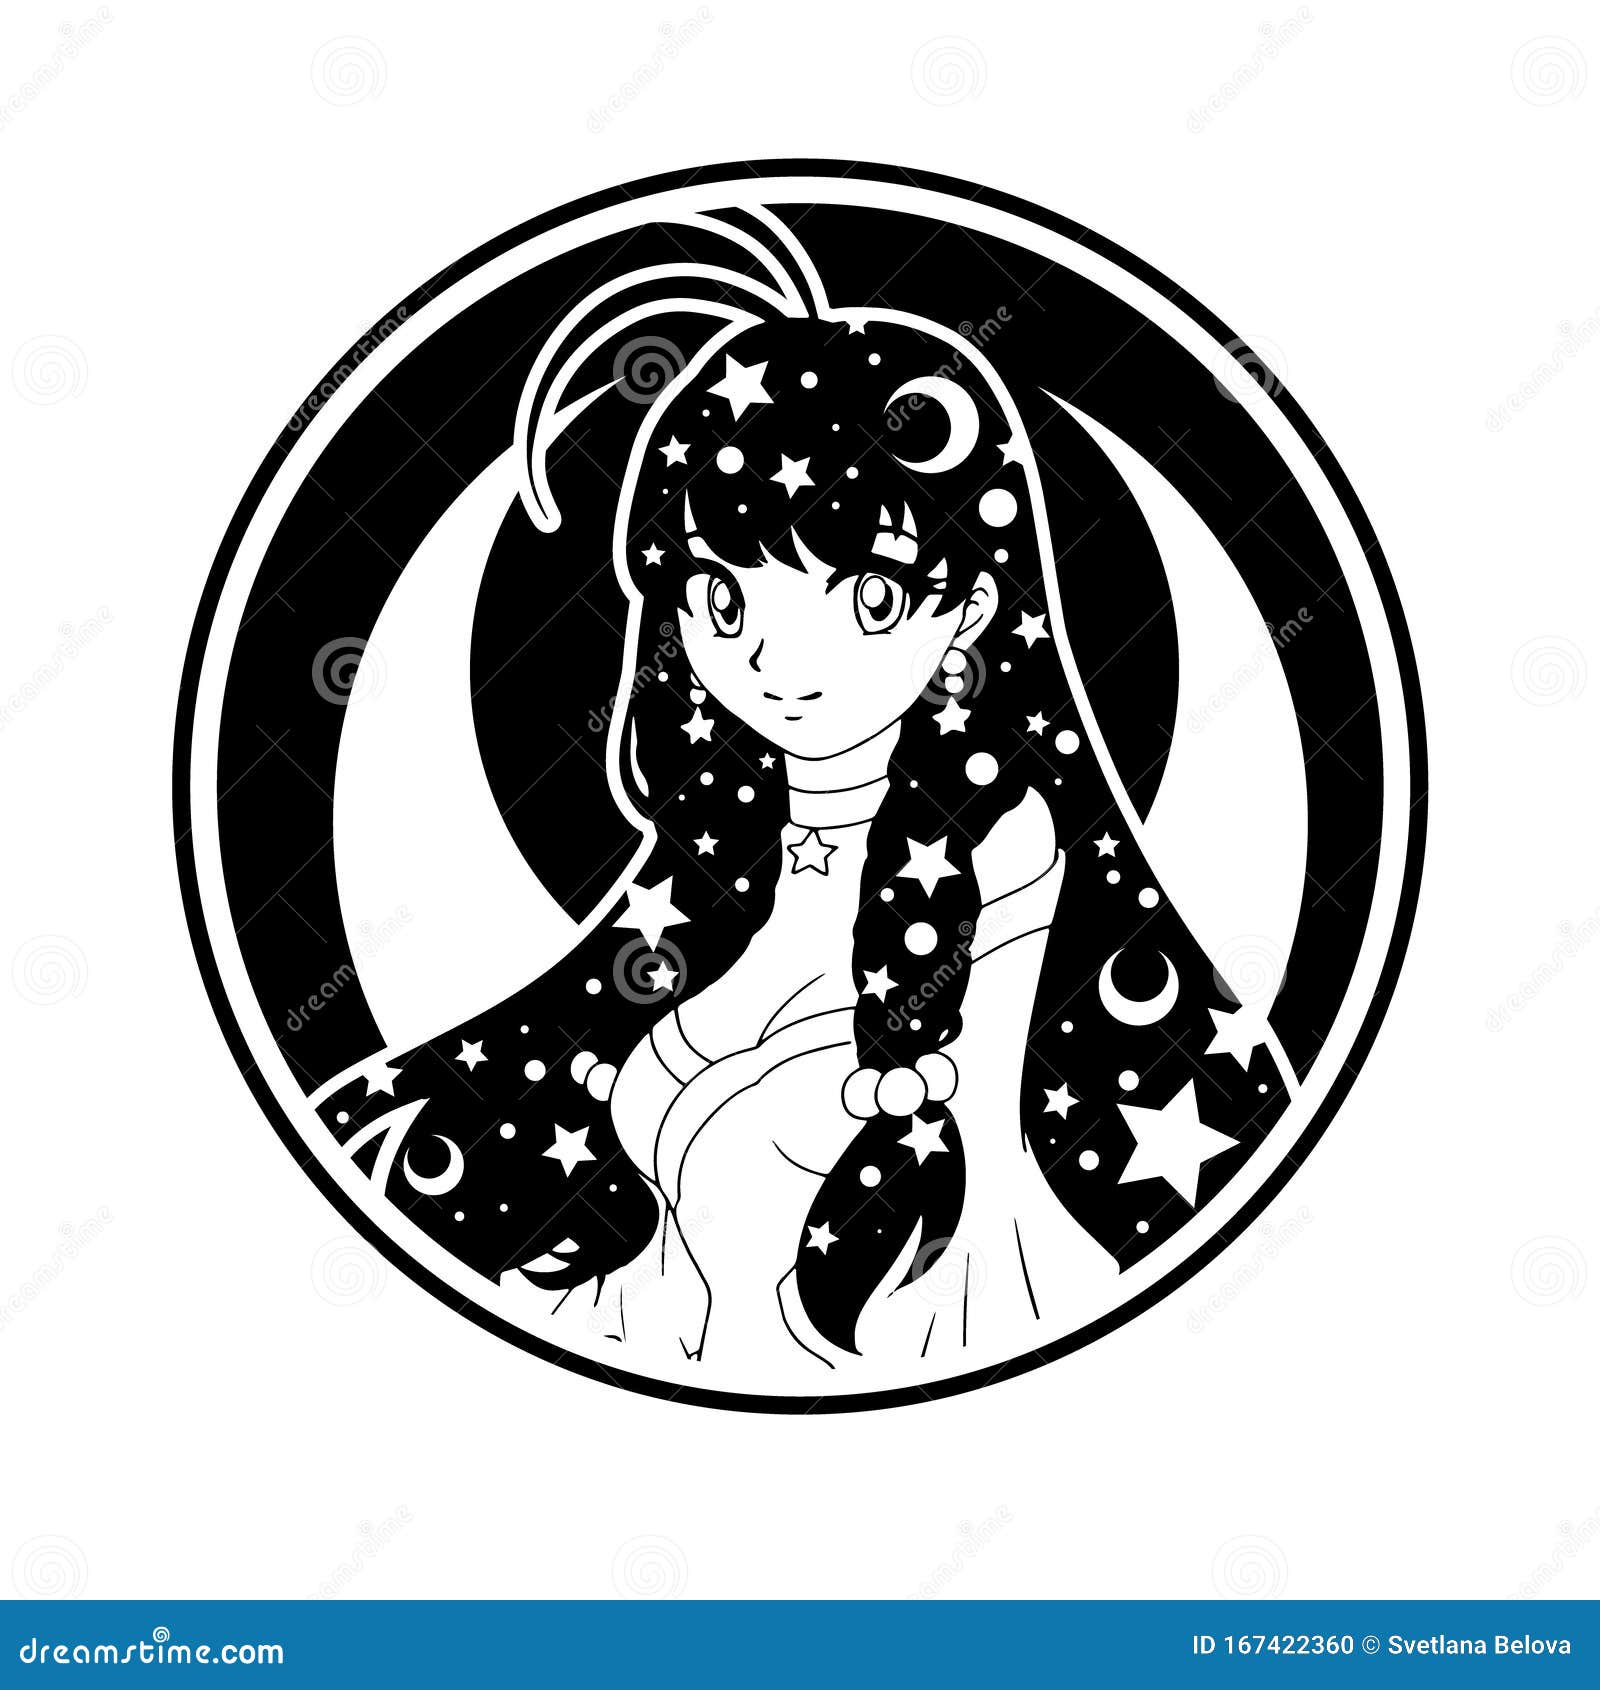 Cute Anime Girl with Long Hair and Big Eyes Stock Vector ...